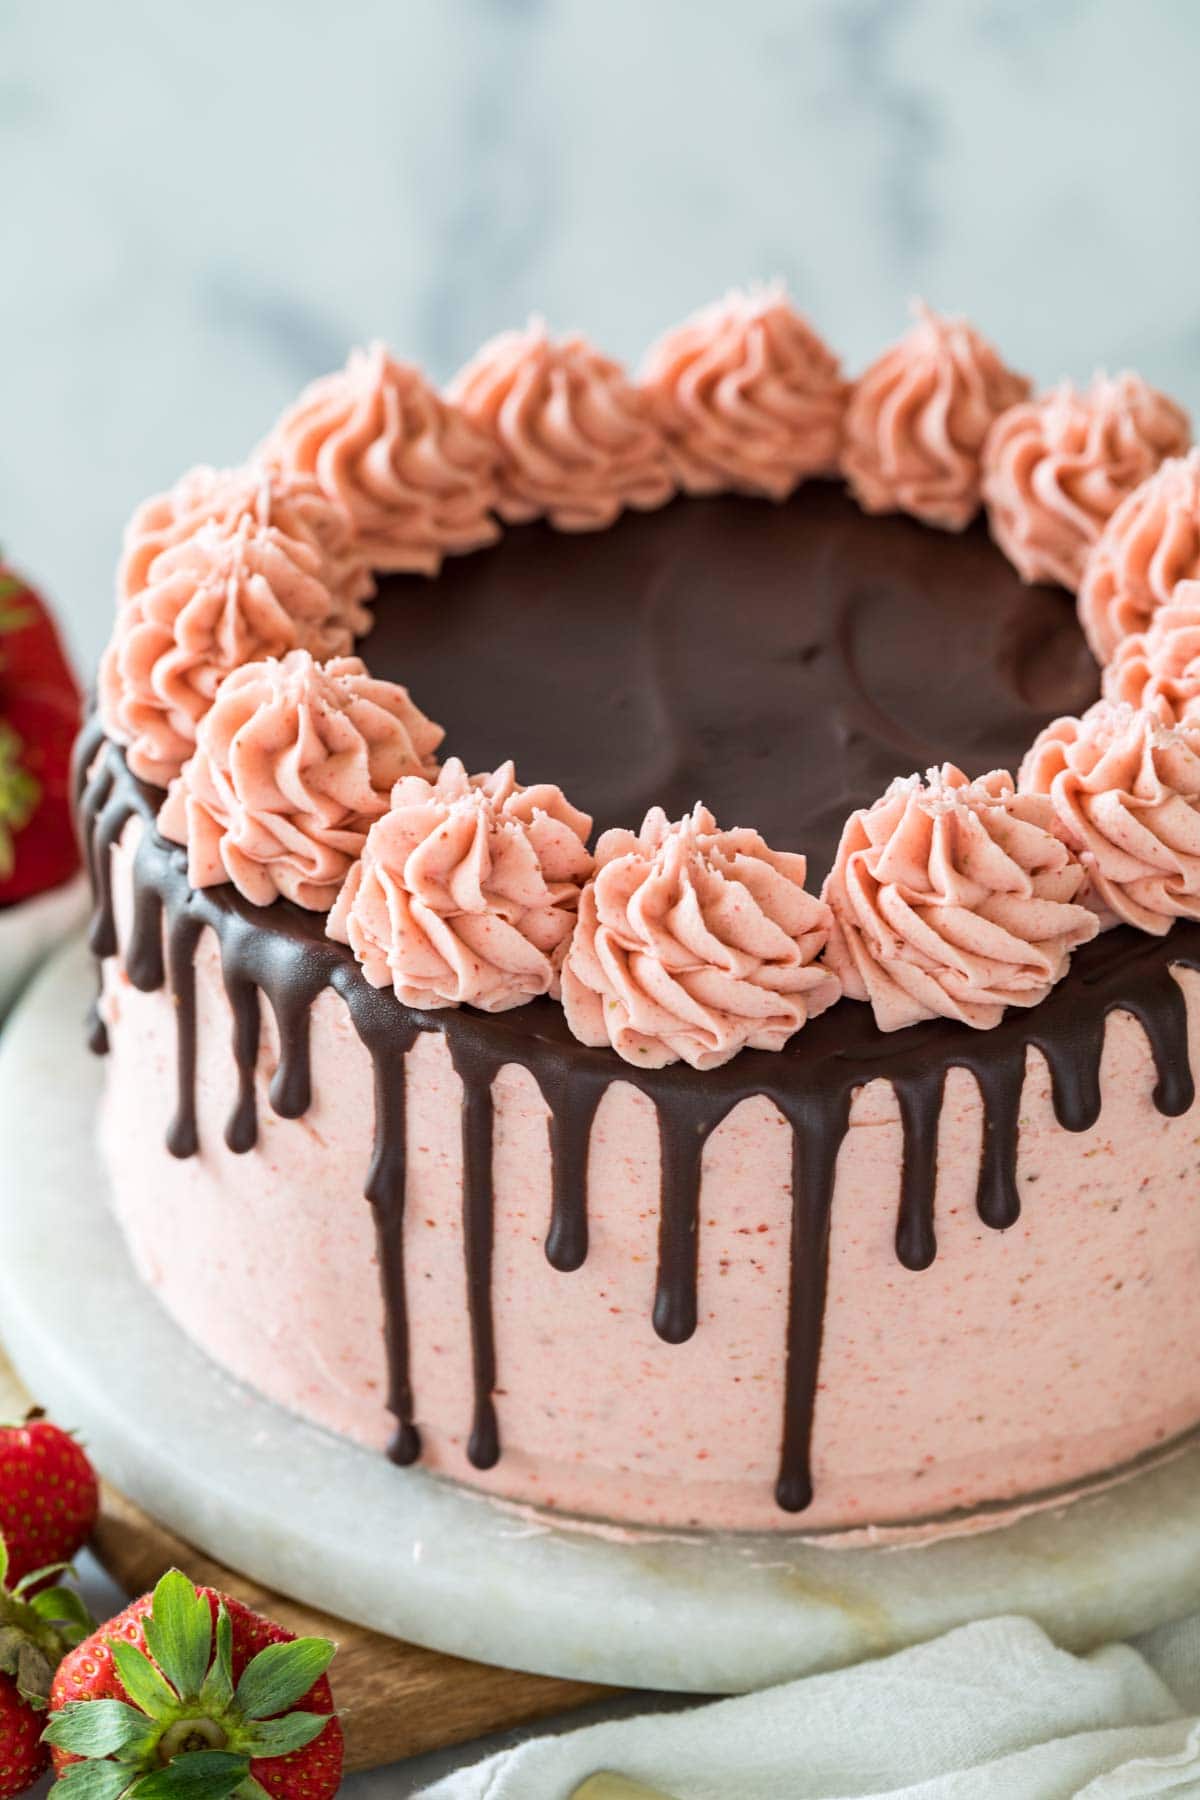 Cake decorated with pink strawberry icing, a chocolate ganache drip, and pink icing swirls.